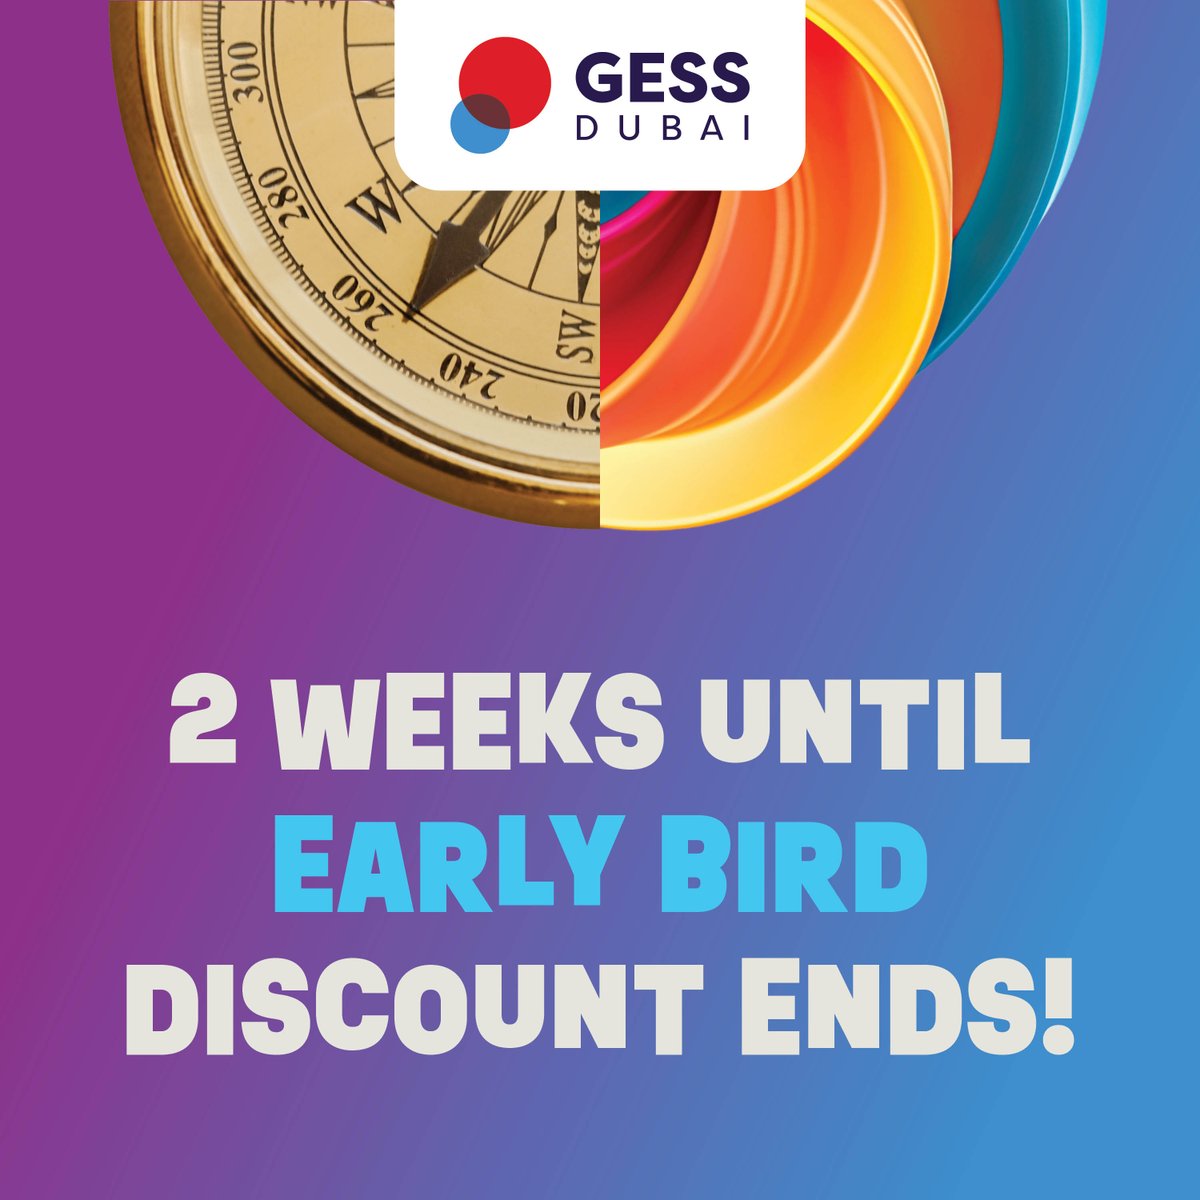 Boost your brand, network with industry leaders, and spotlight your expertise at GESS Dubai 2024! Don't miss out on our Early Bird discount ends, Friday, April 26 2024 Secure a spot: gessdubai.com/lets-get-touch ⏳